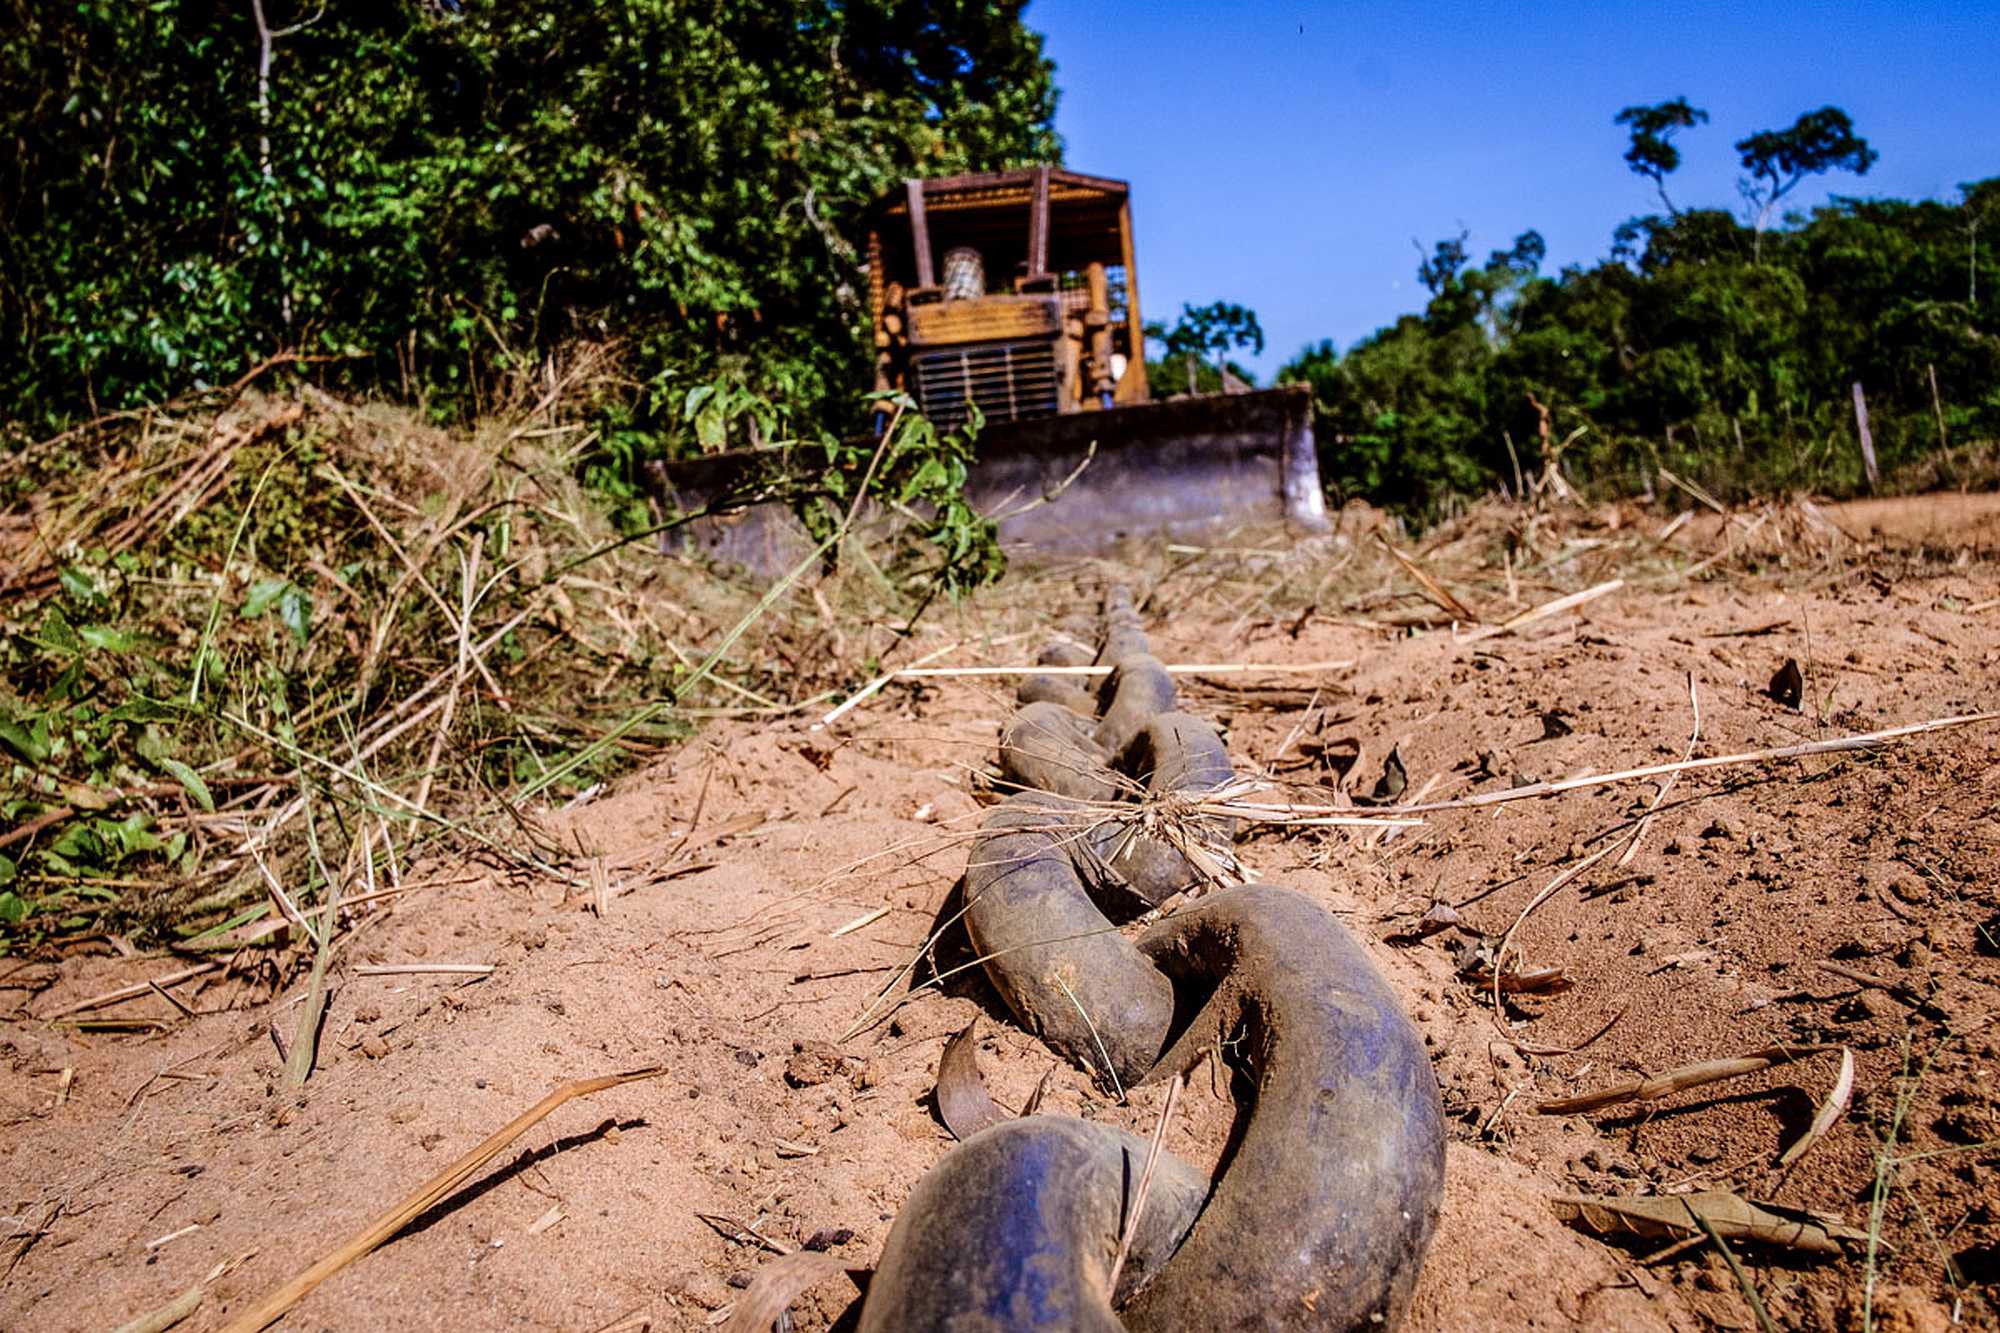 Land grabs put the rainforest at risk by increasing deforestation in the Brazilian Amazon.